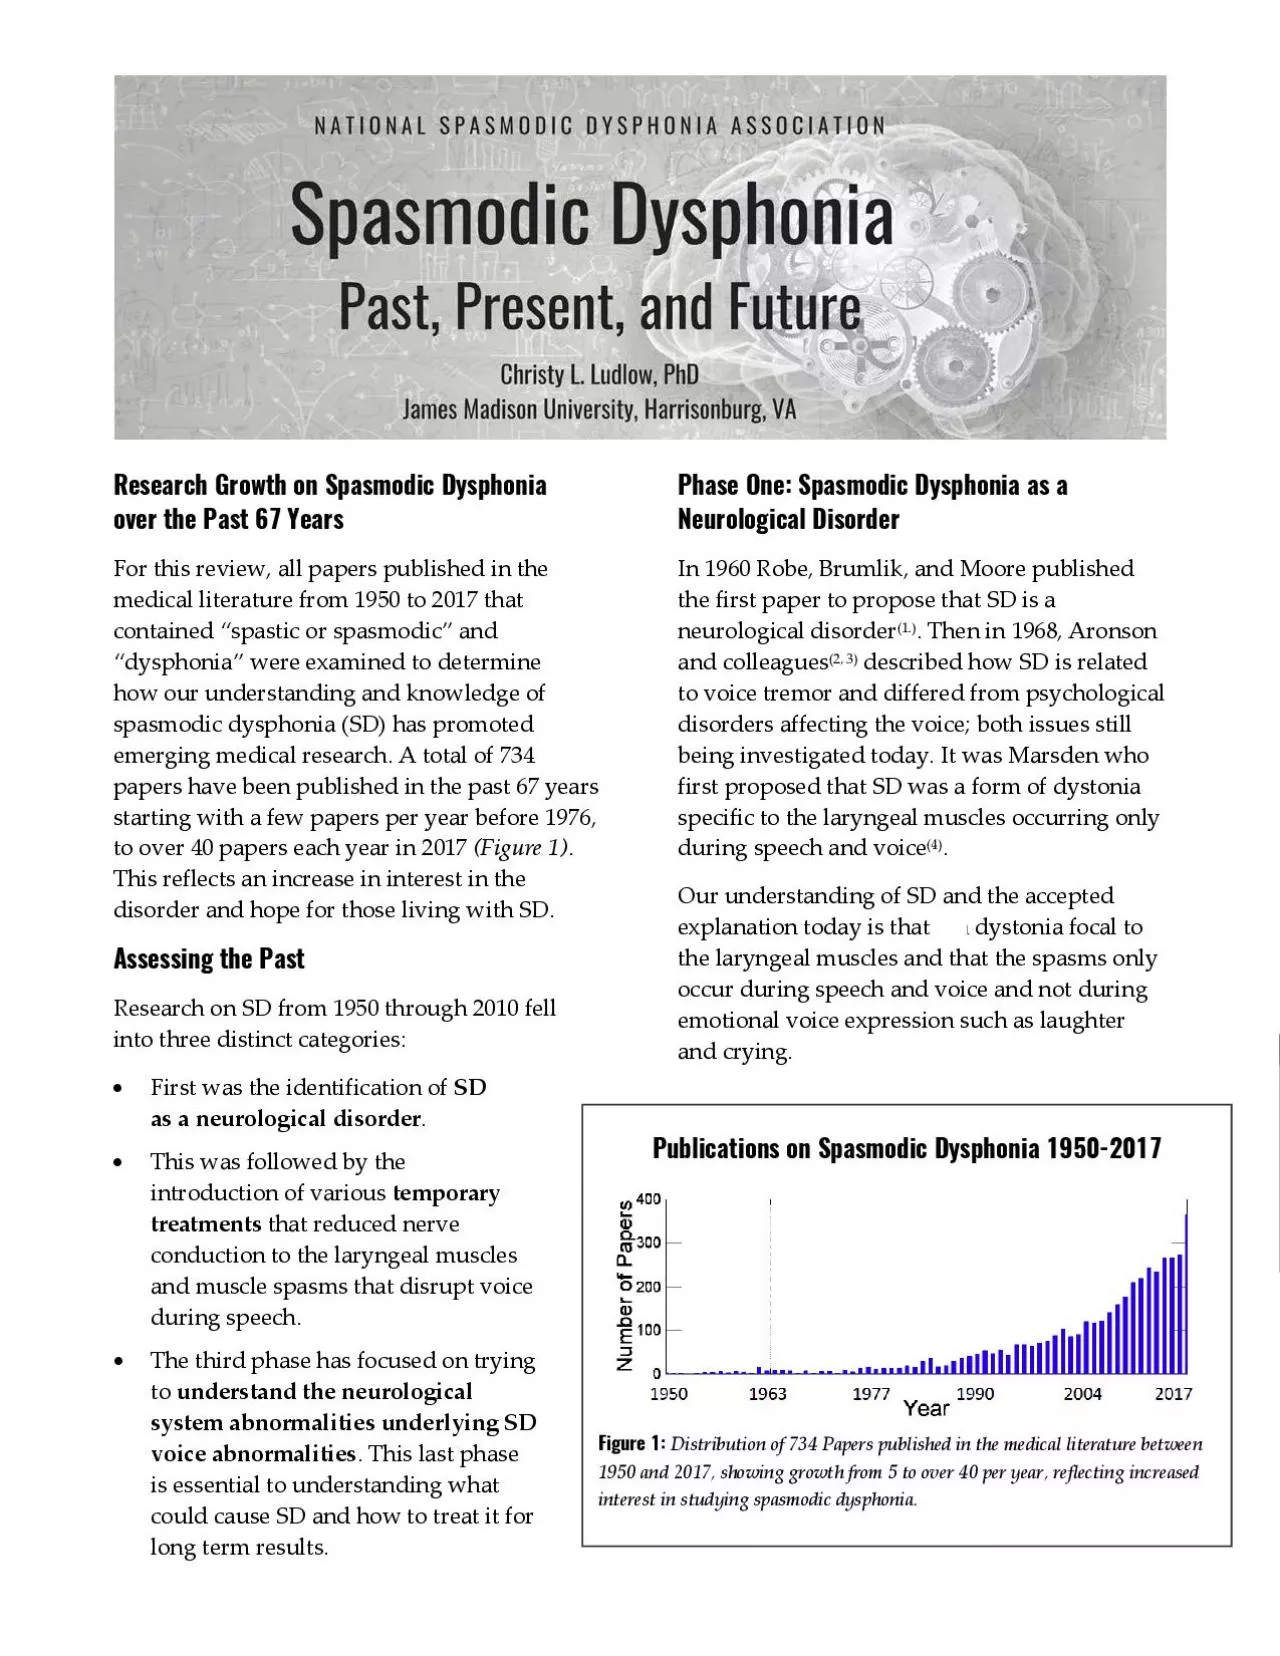 Research Growth on Spasmodic Dysphonia overthe ast67 YearsFor this rev